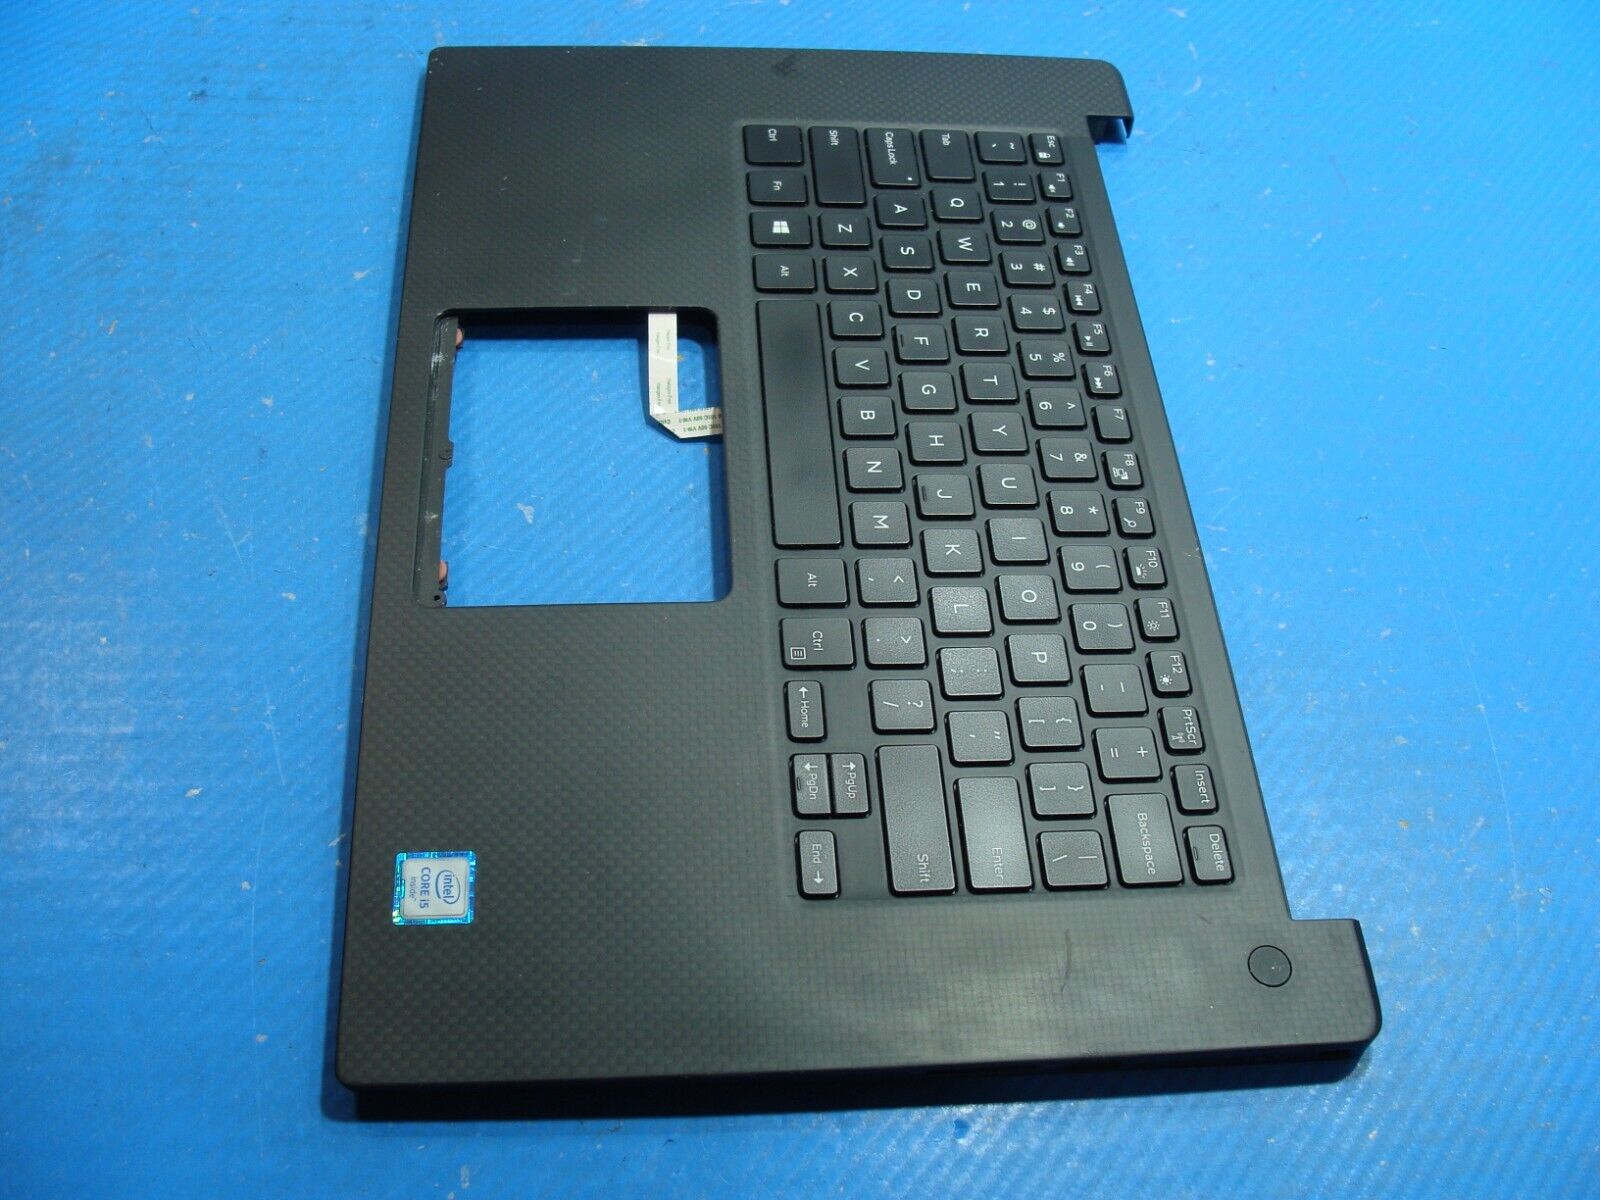 Dell XPS 15.6